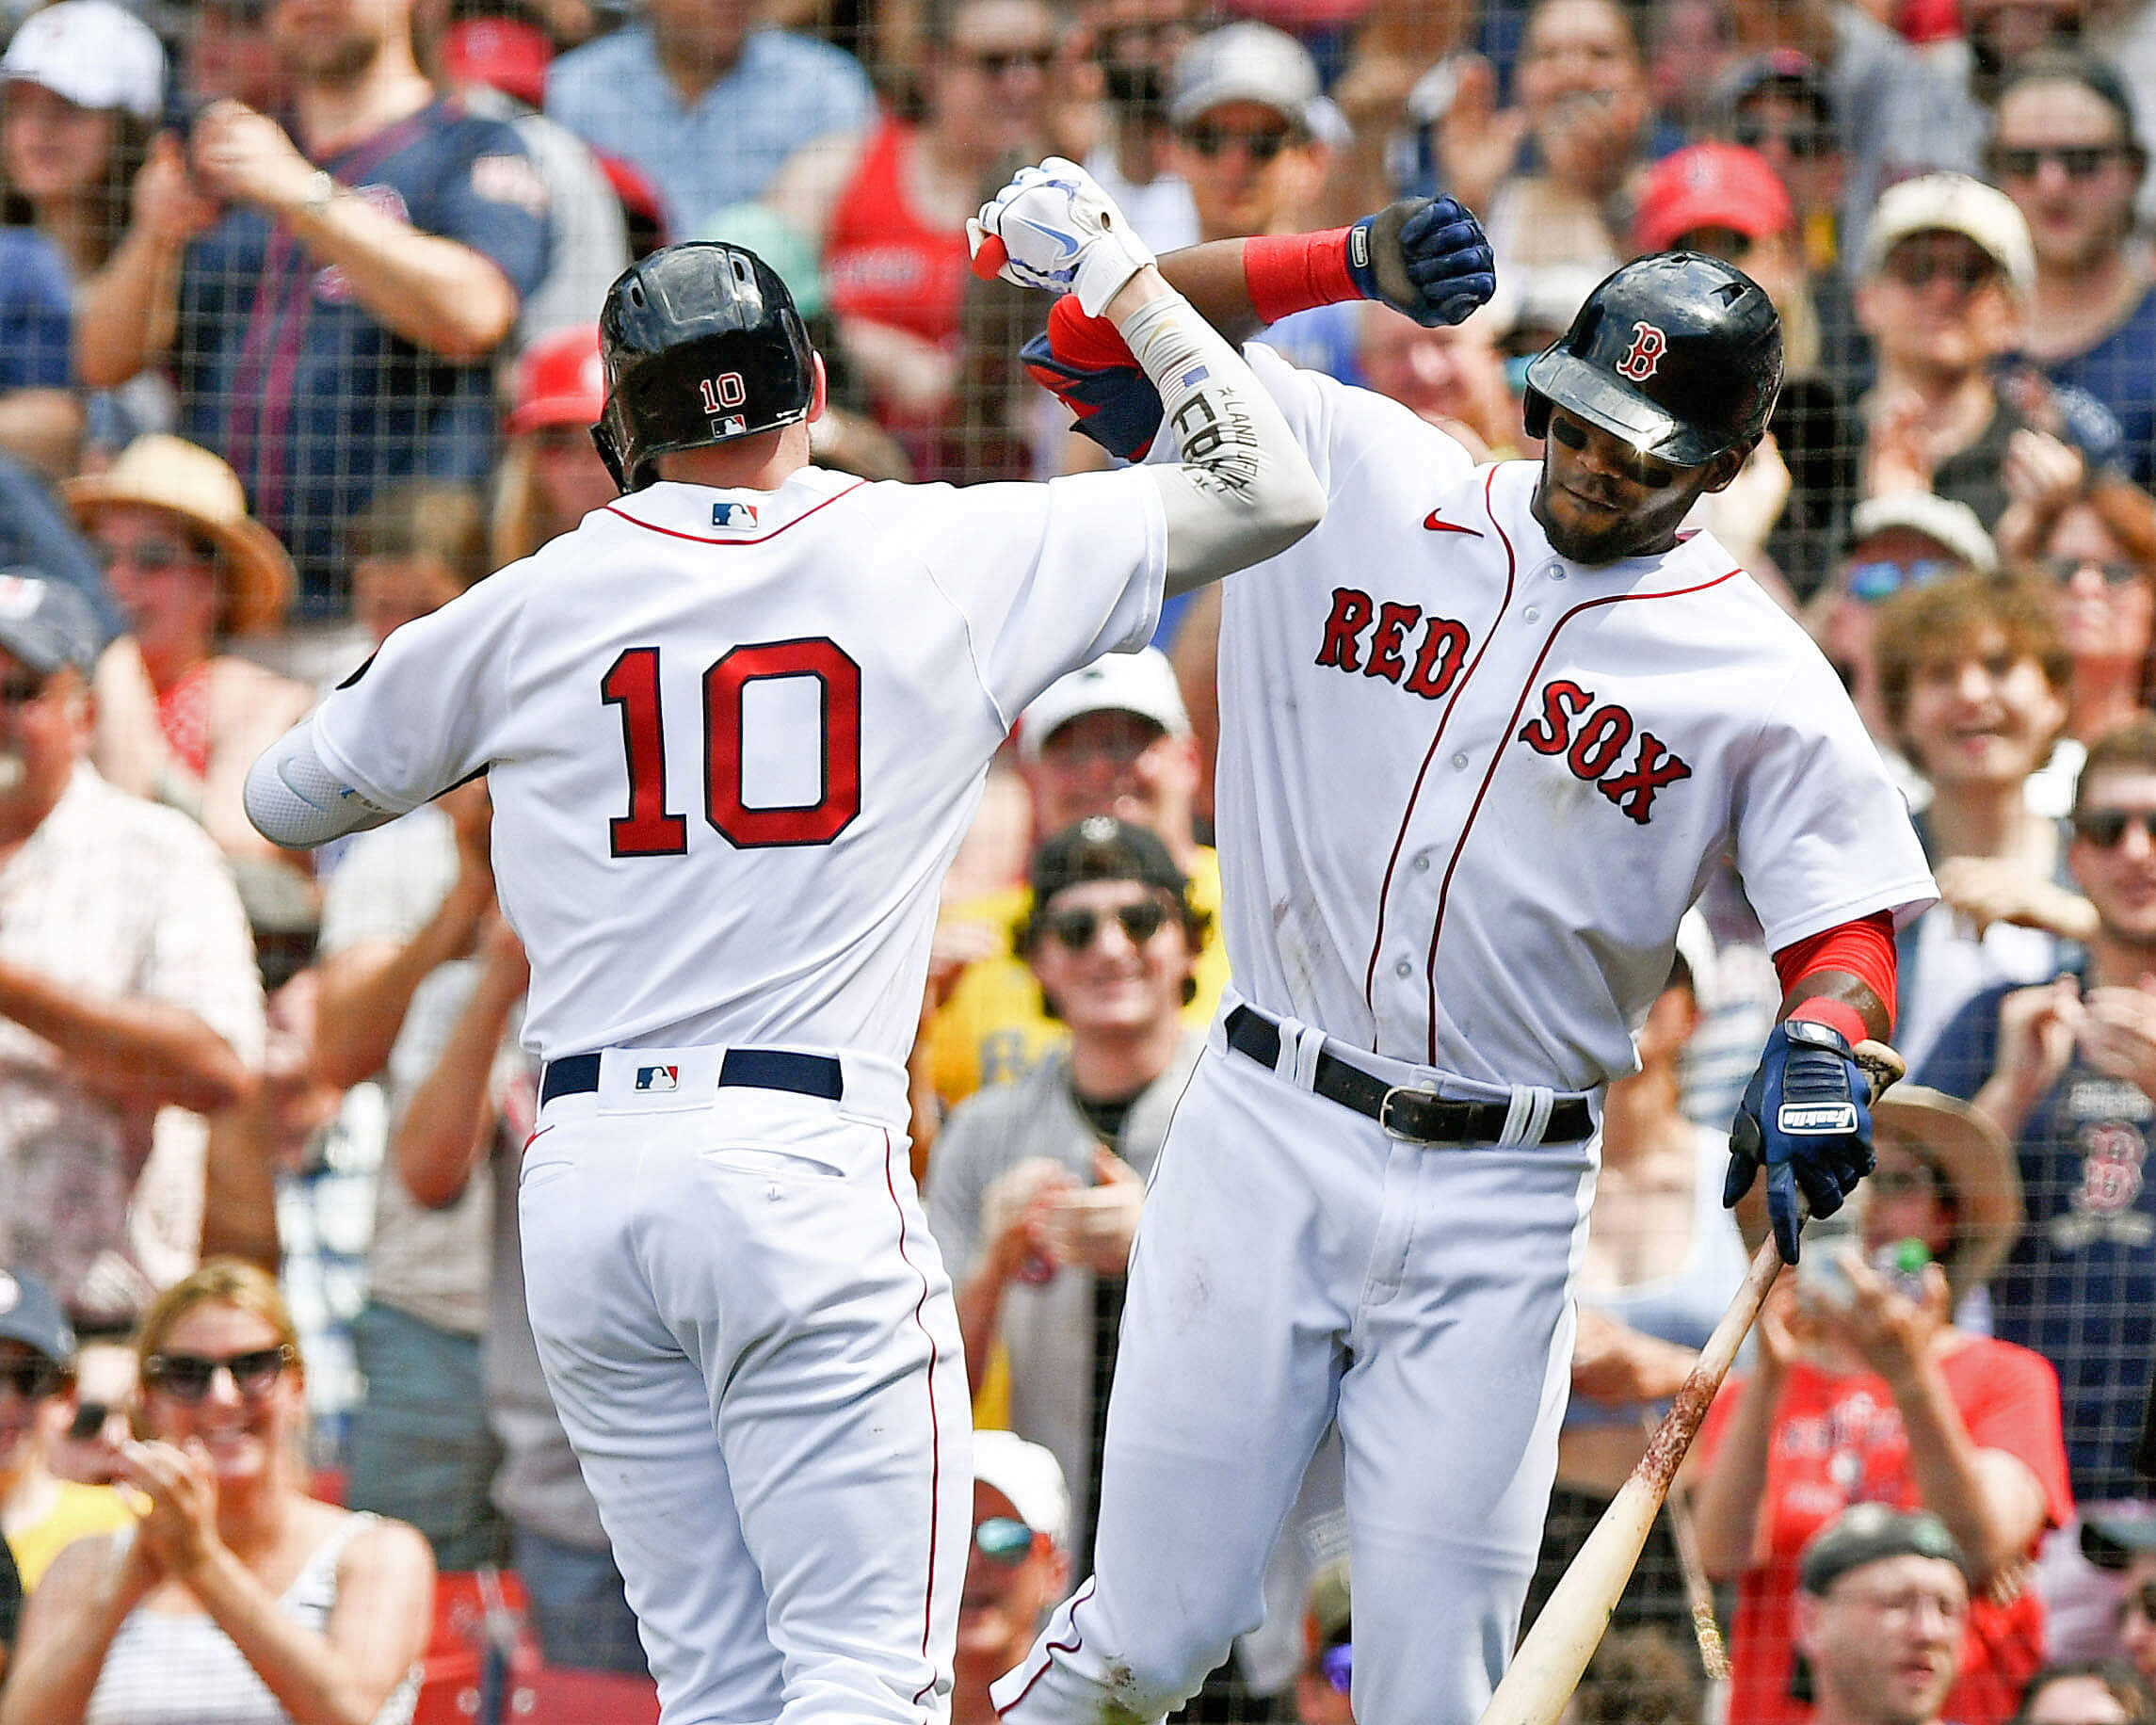 BetMGM Partners With the Boston Red Sox on Eve of Massachusetts’ Online Sports Betting Launch